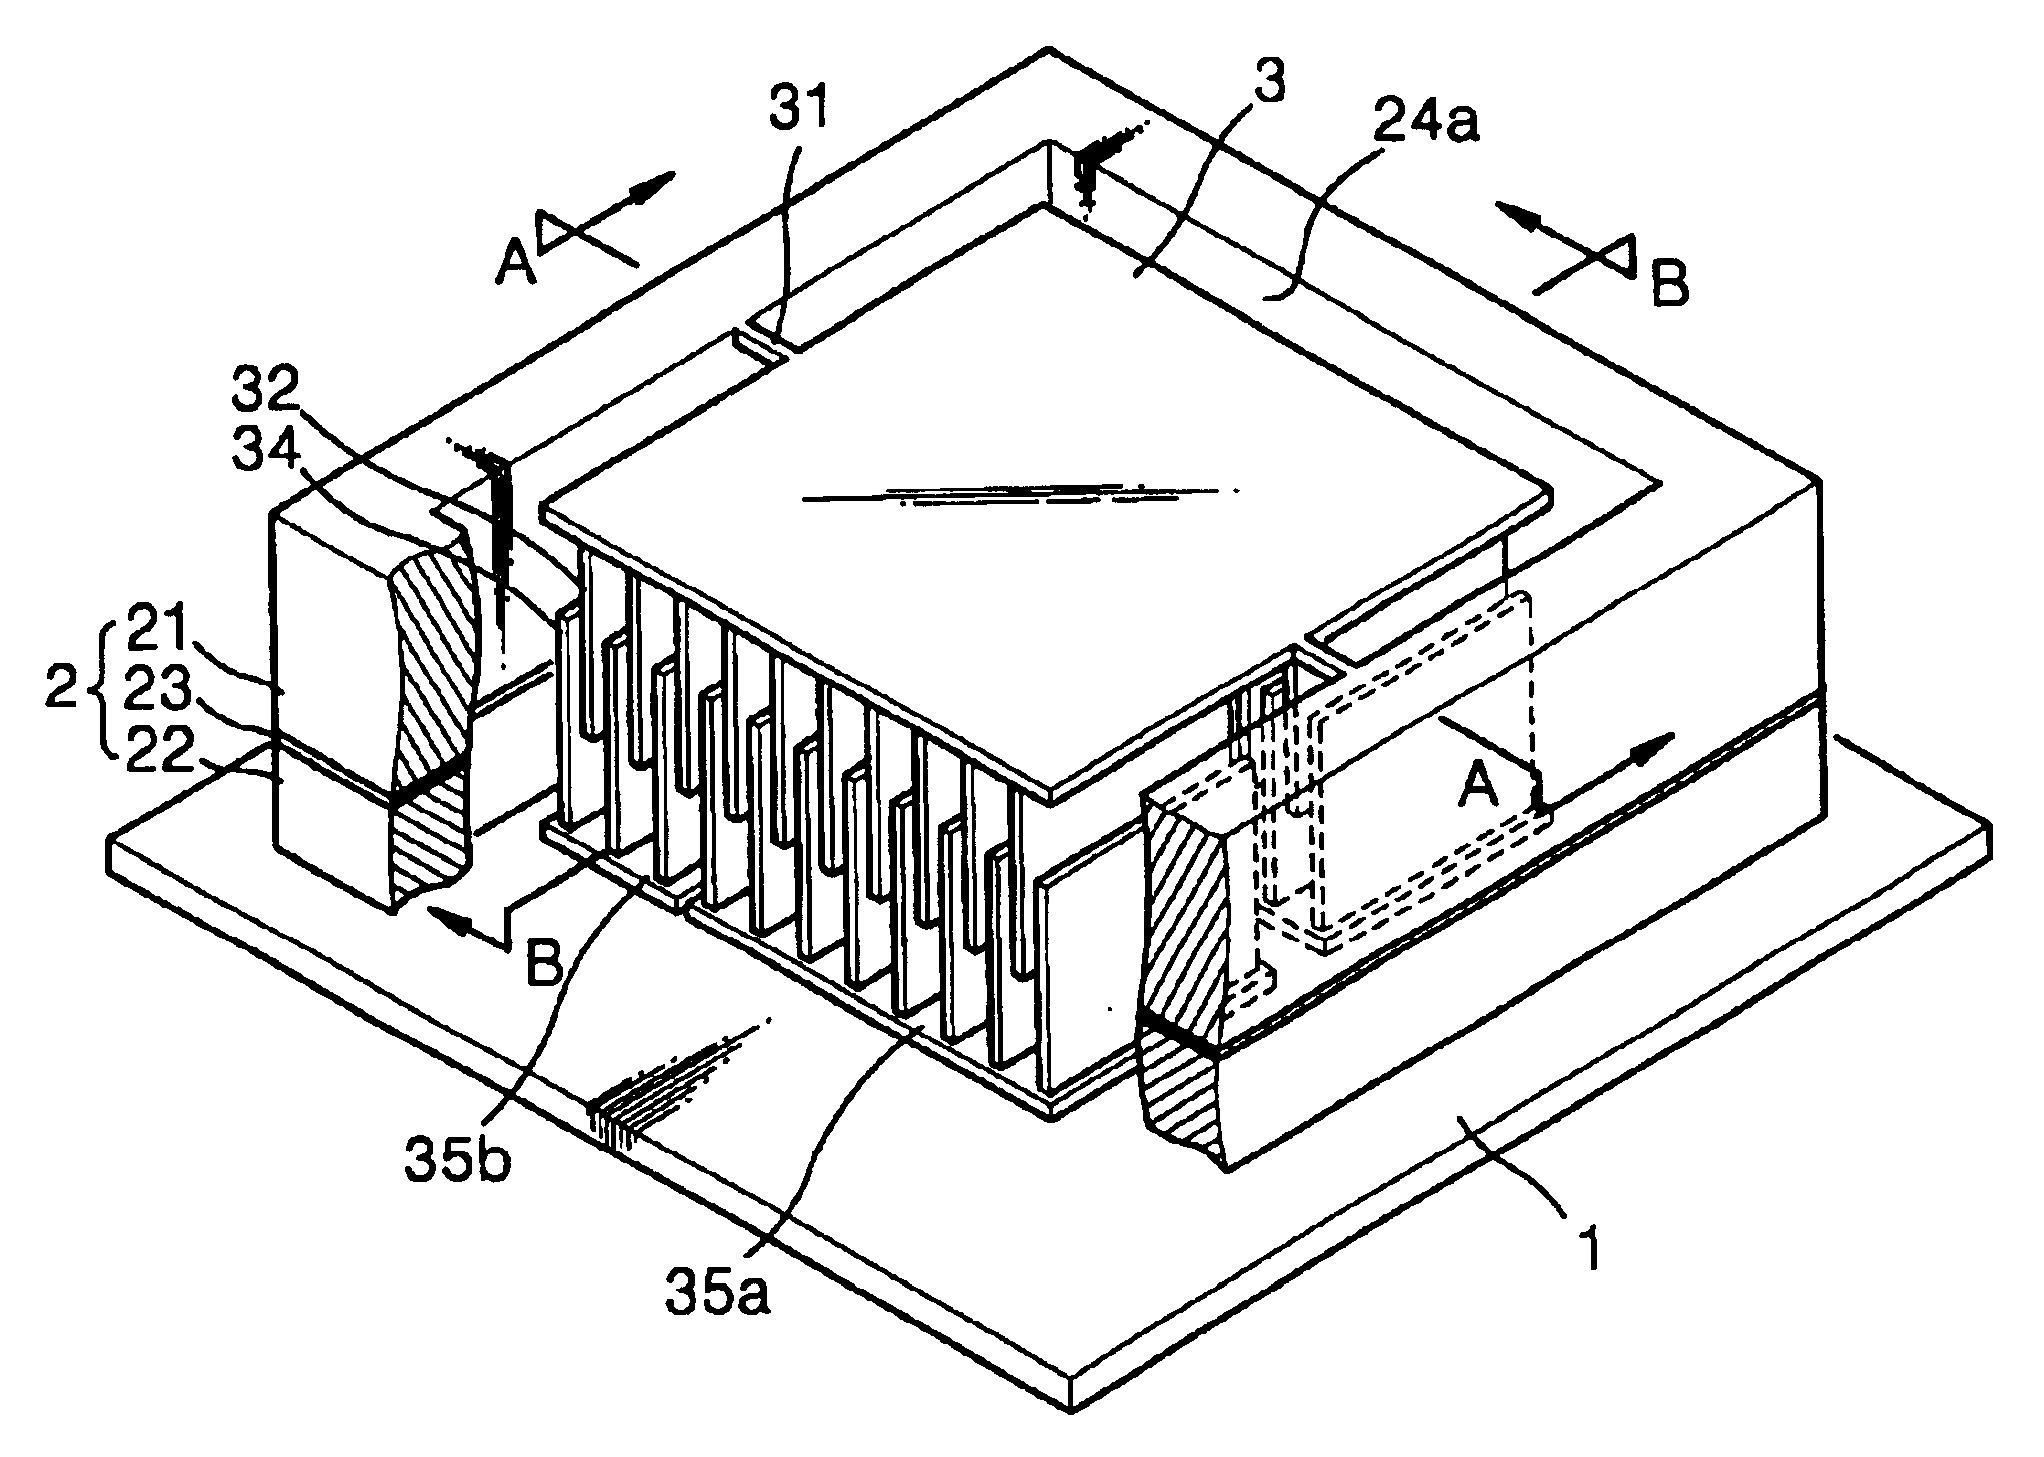 Micro-actuator with interdigitated combs perpendicular to a base